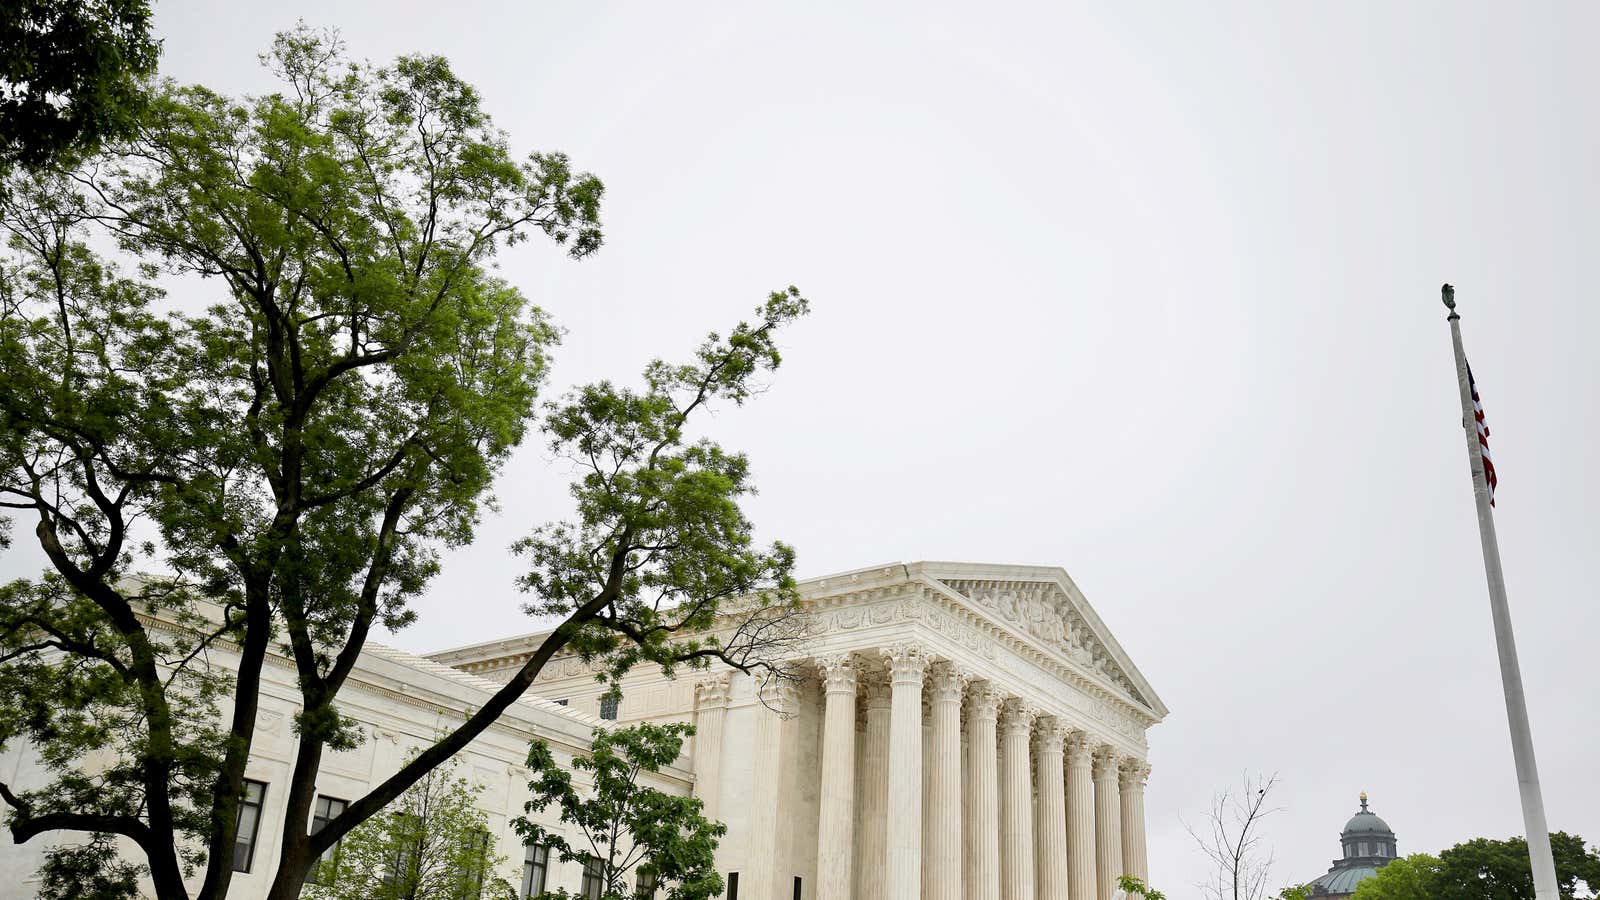 Google is at center of US Supreme Court class-action review